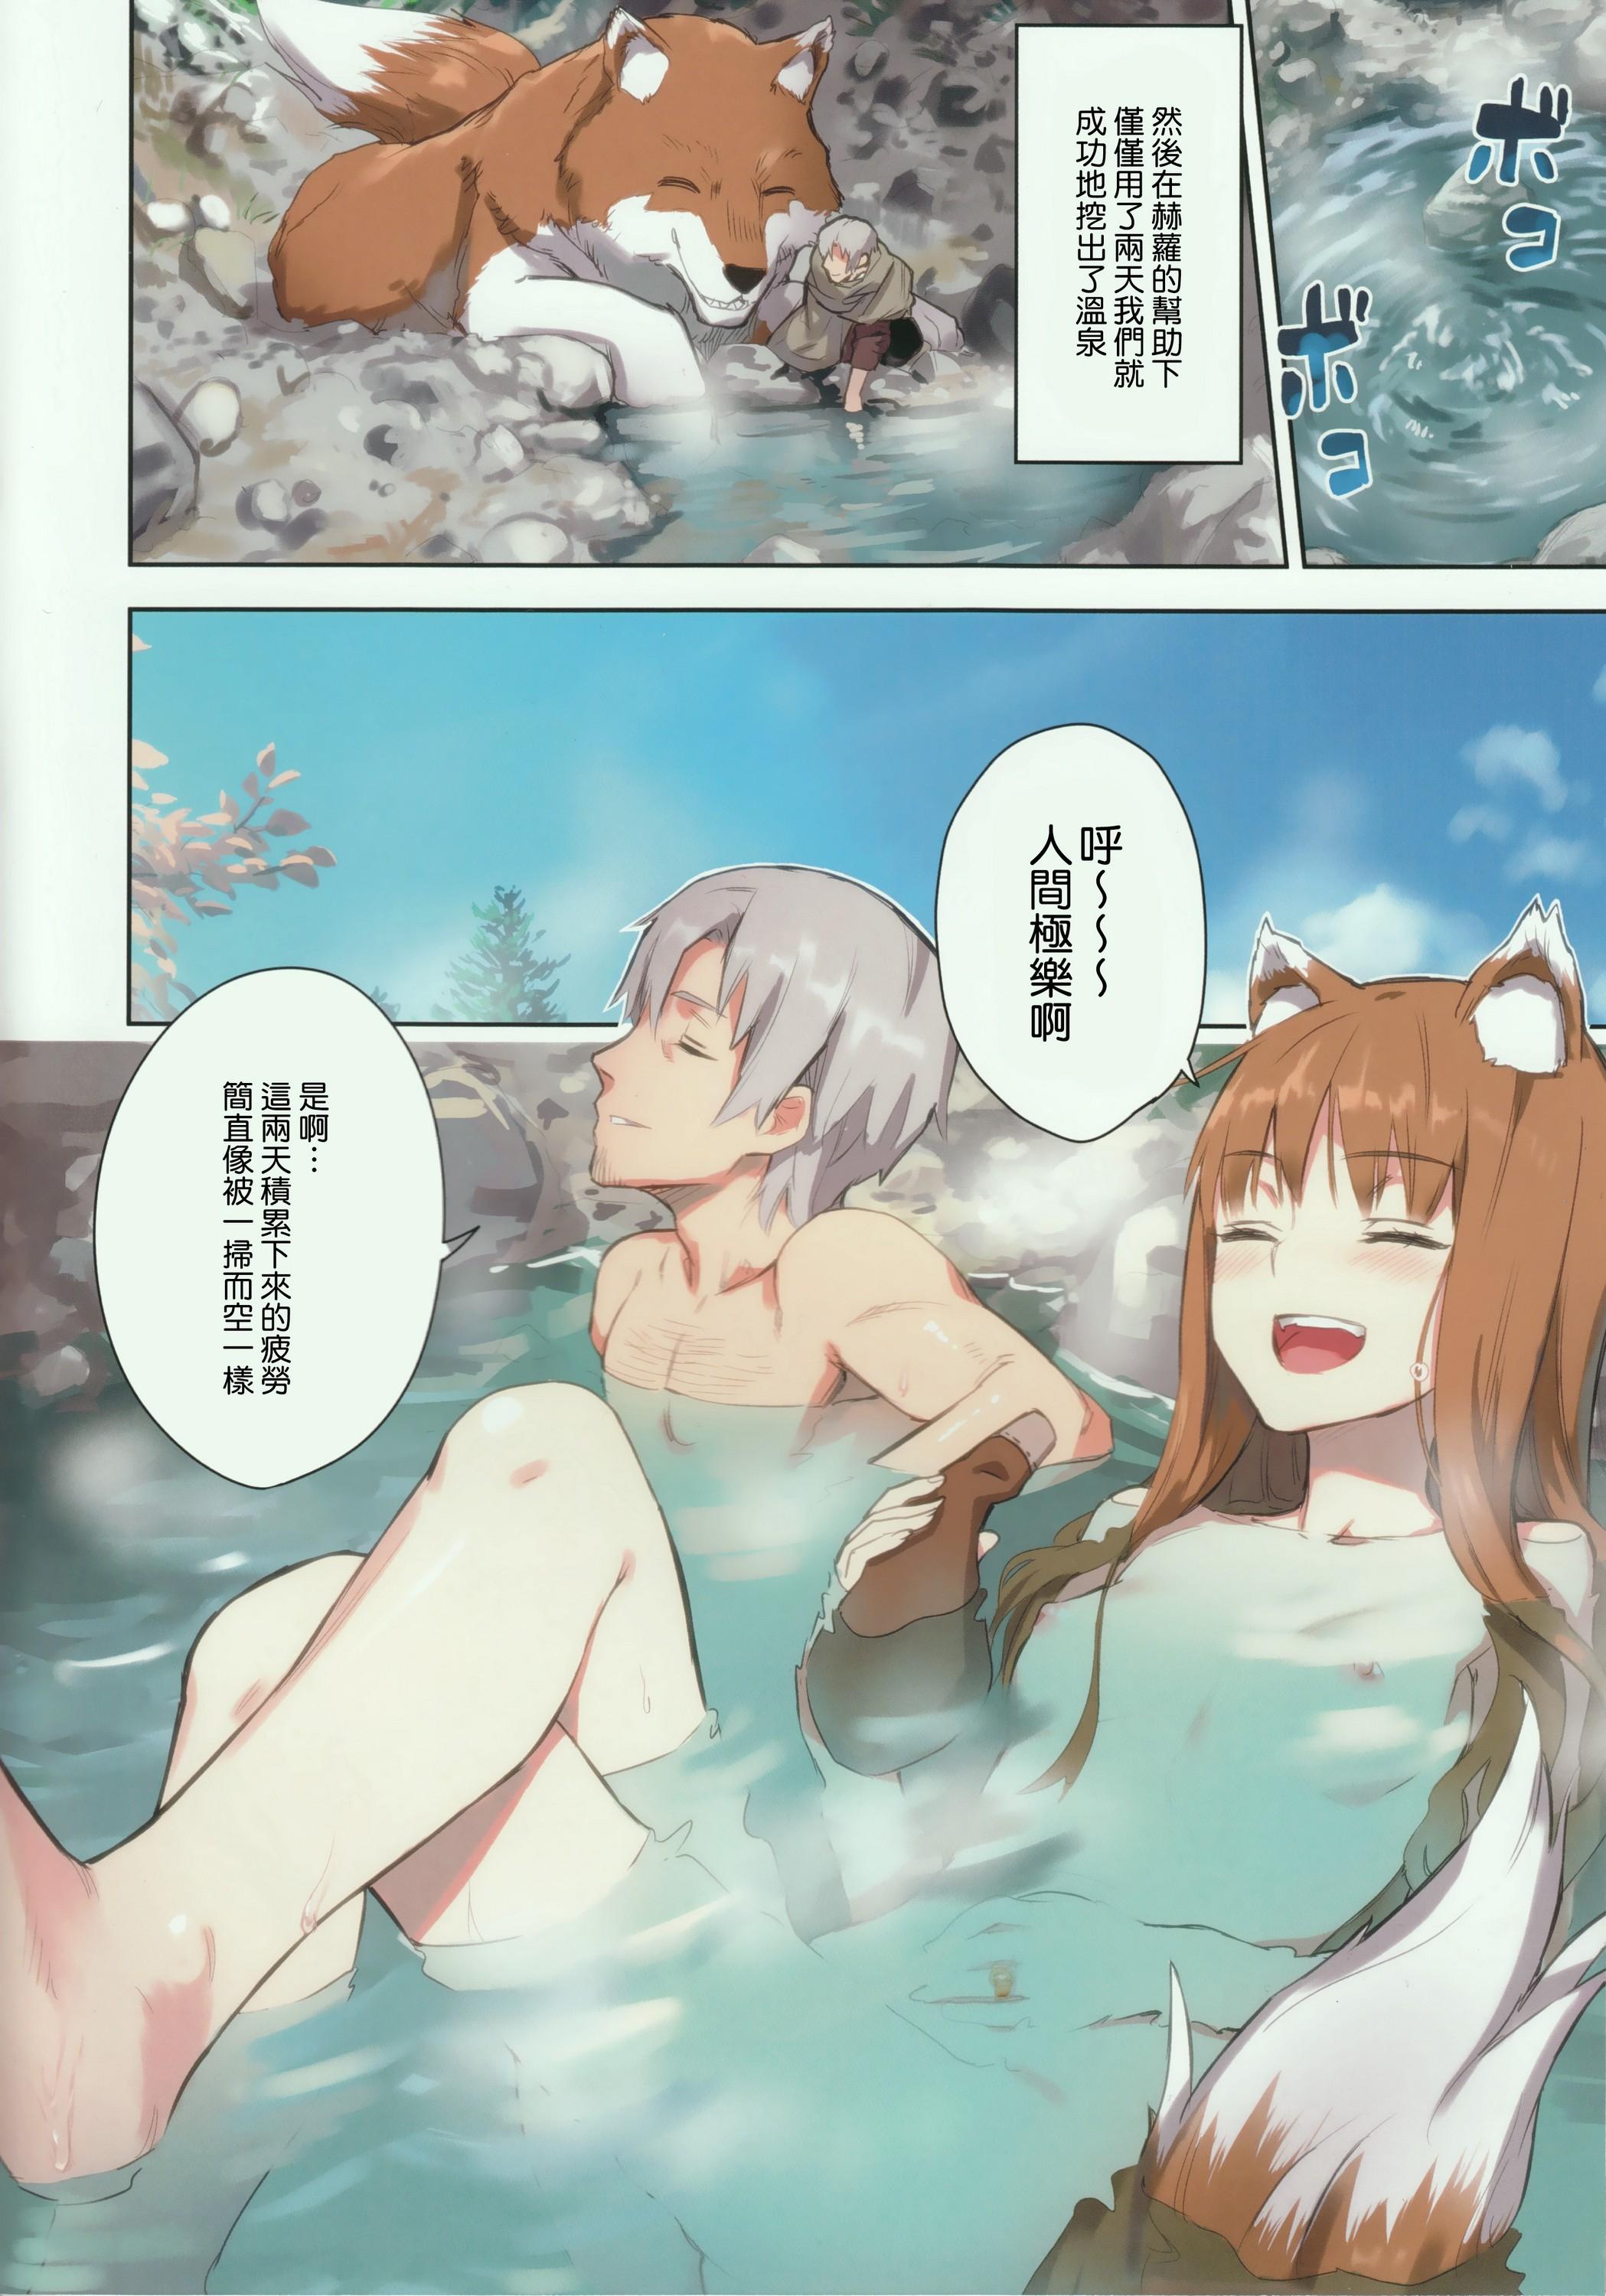 Sex Toys Wacchi to Nyohhira Bon FULL COLOR - Spice and wolf Hymen - Page 8